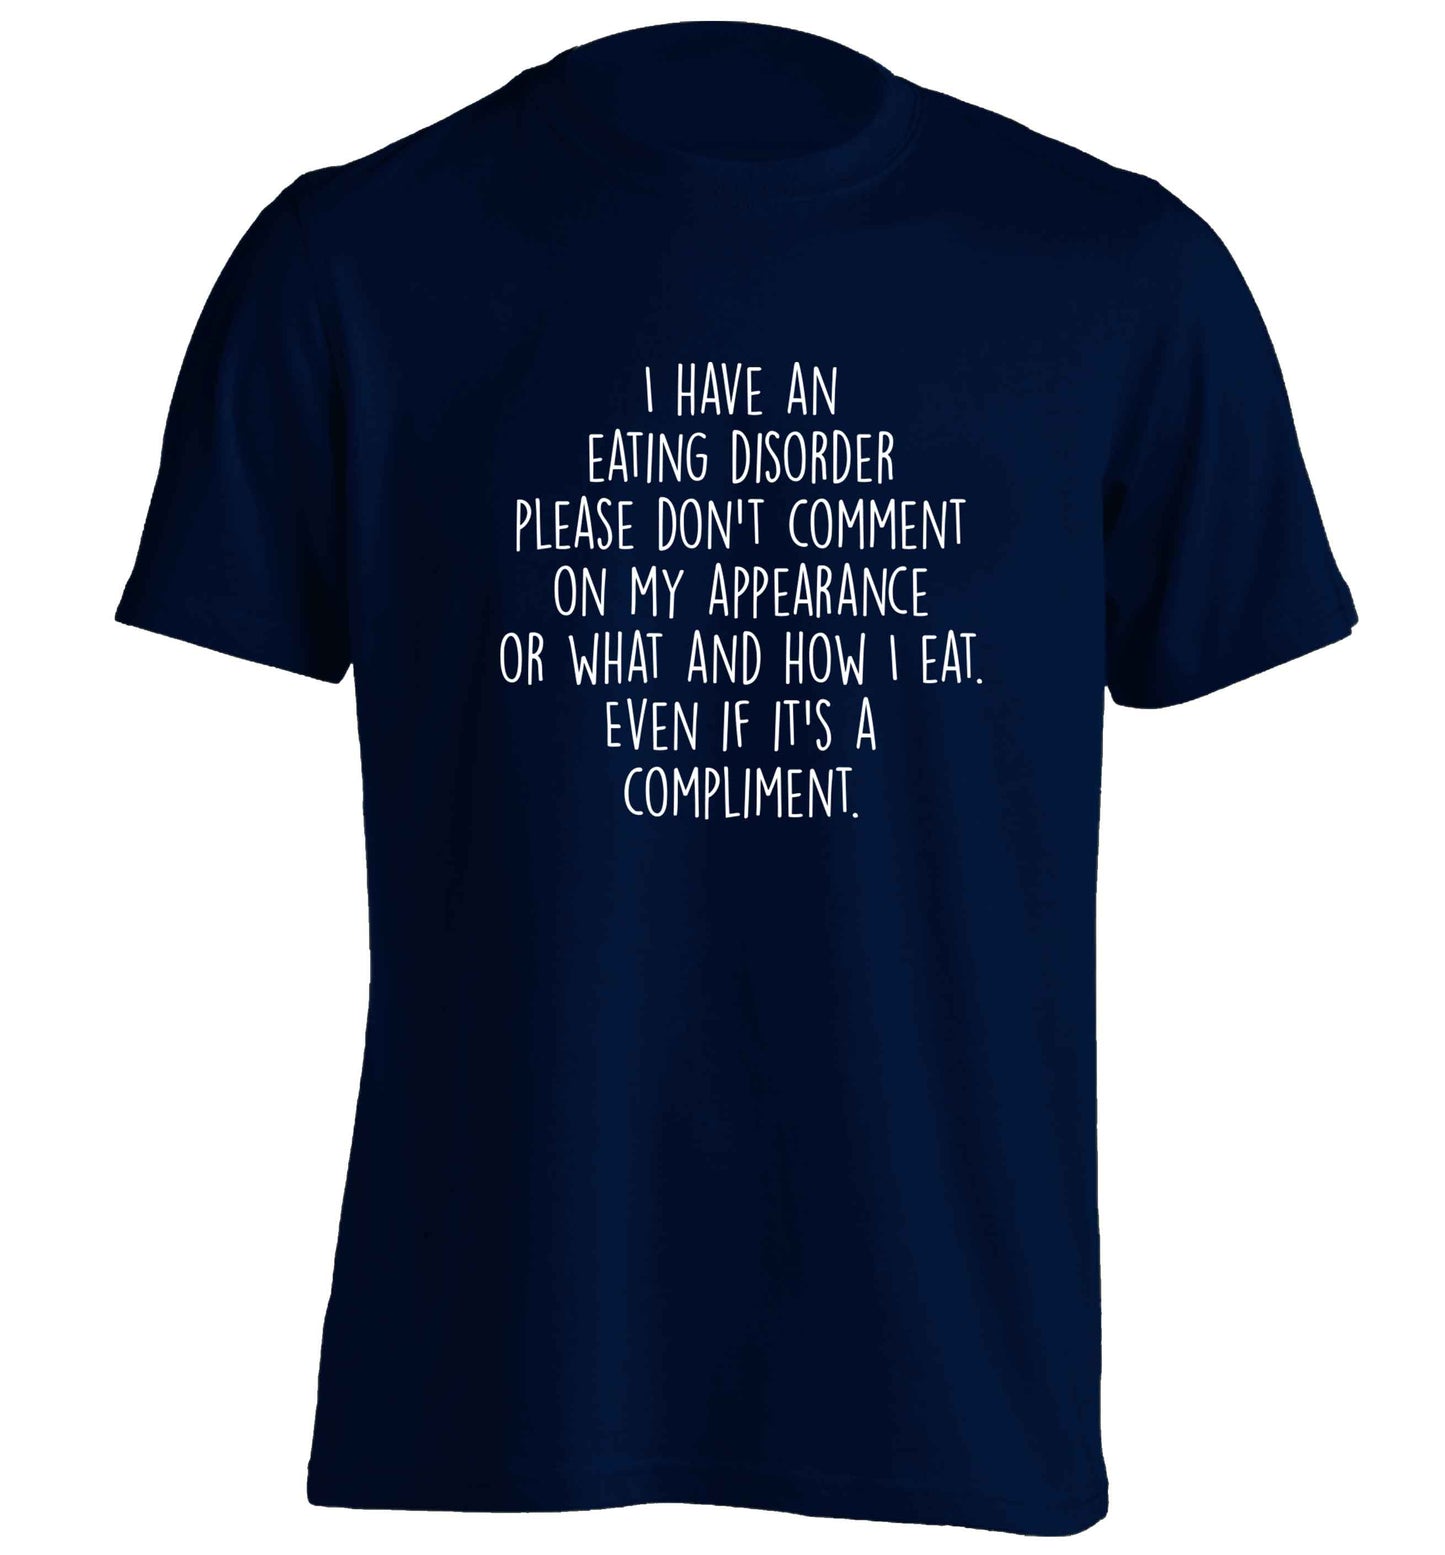 I have an eating disorder please don't comment on my appearance or what and how I eat. Even if it's a compliment adults unisex navy Tshirt 2XL